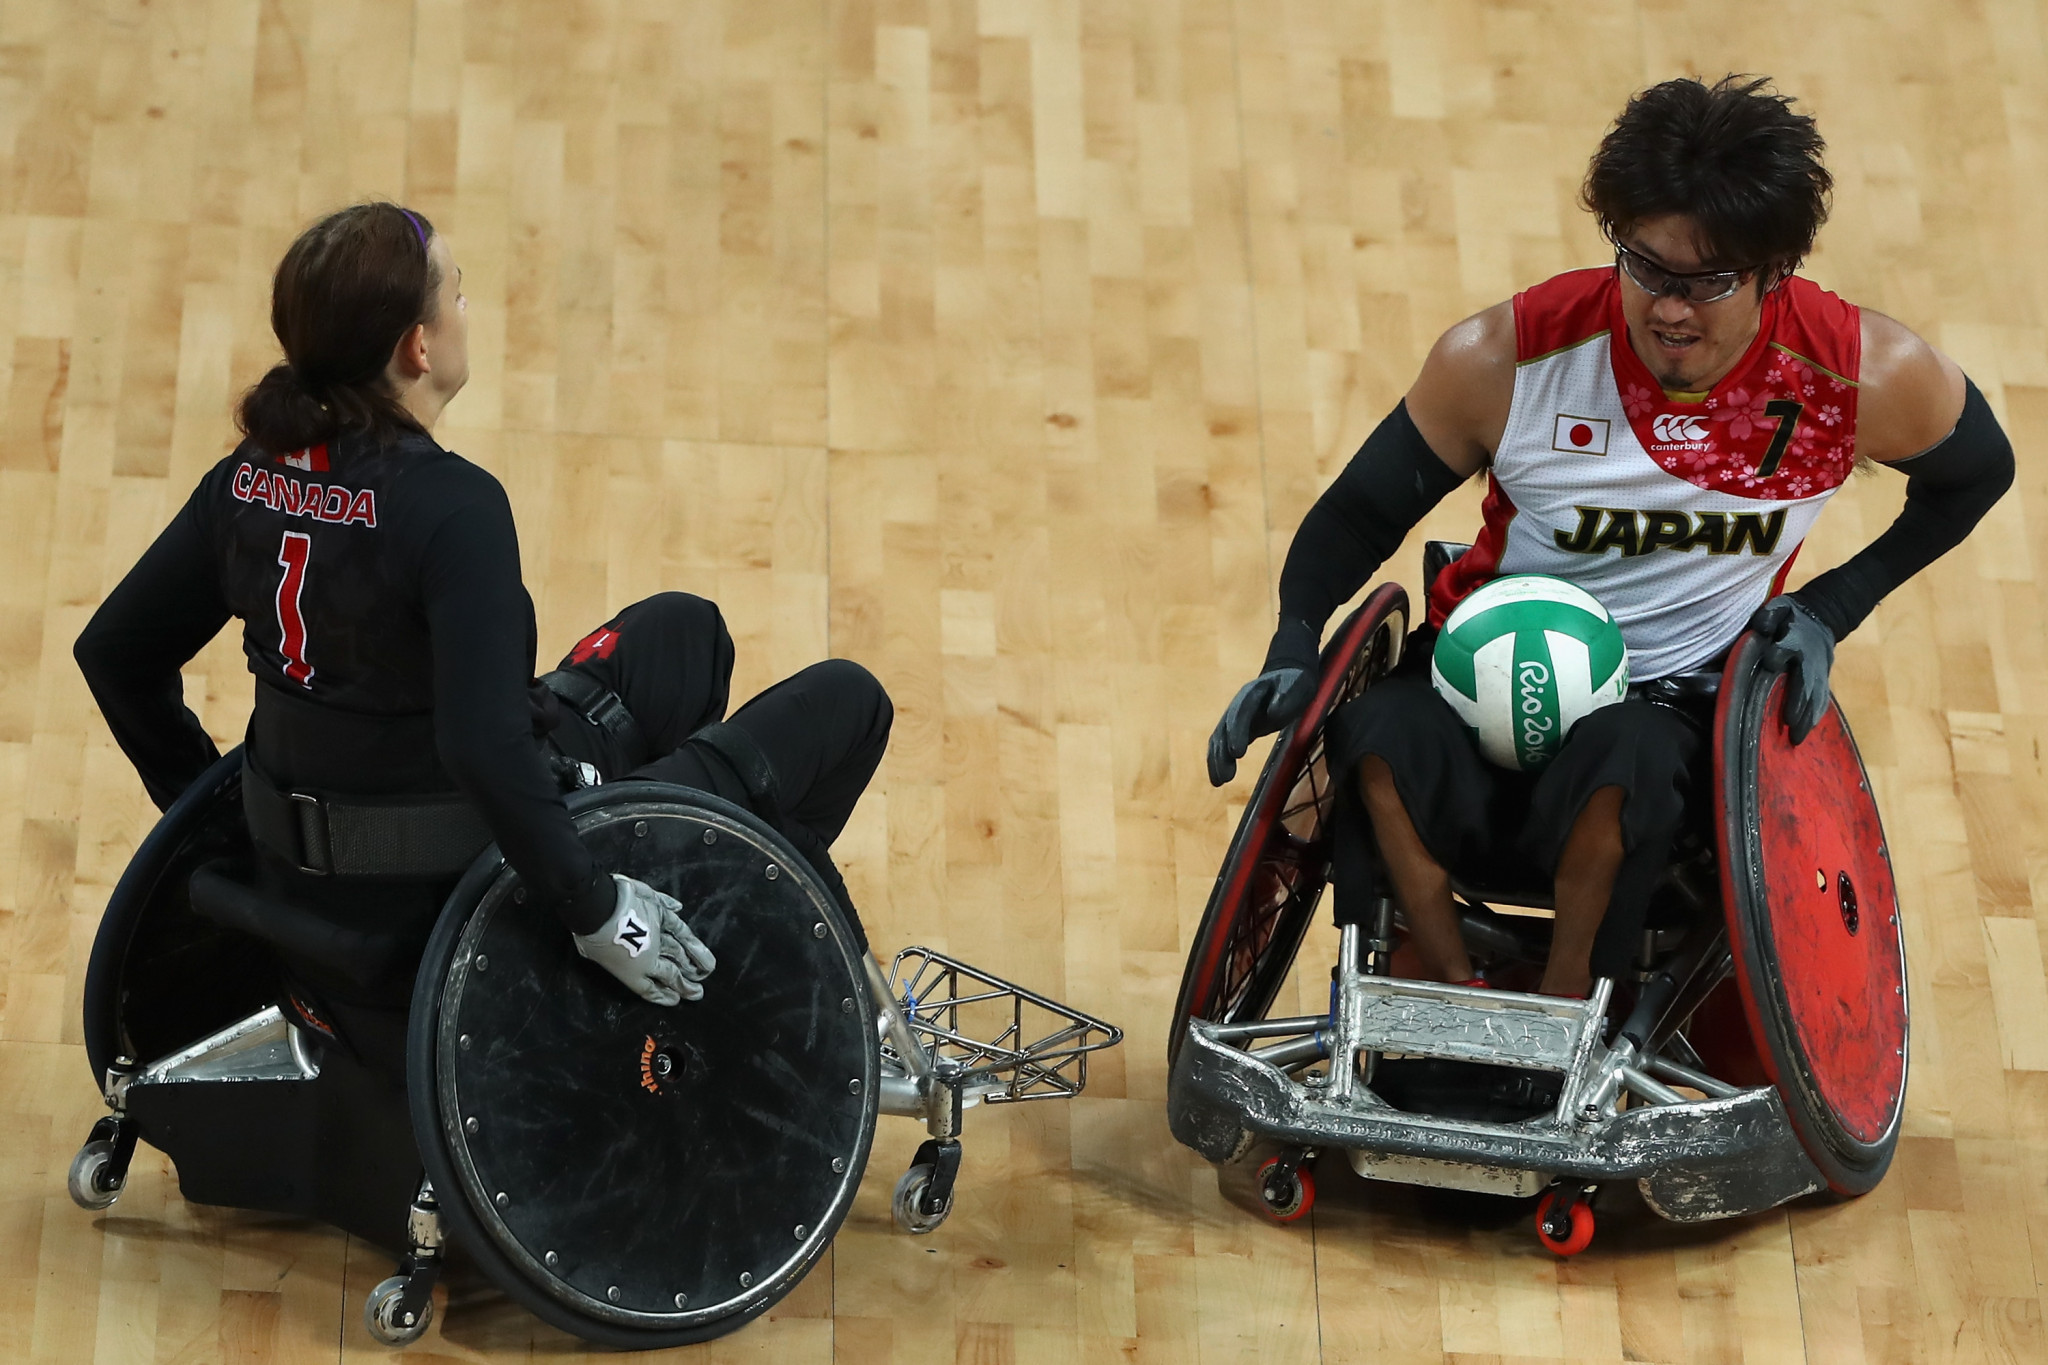 Daisuke Ikezaki is nominated for his MVP performance in the 2018 Wheelchair Rugby World Championship as Japan beat Australia in a tense final ©Getty Images